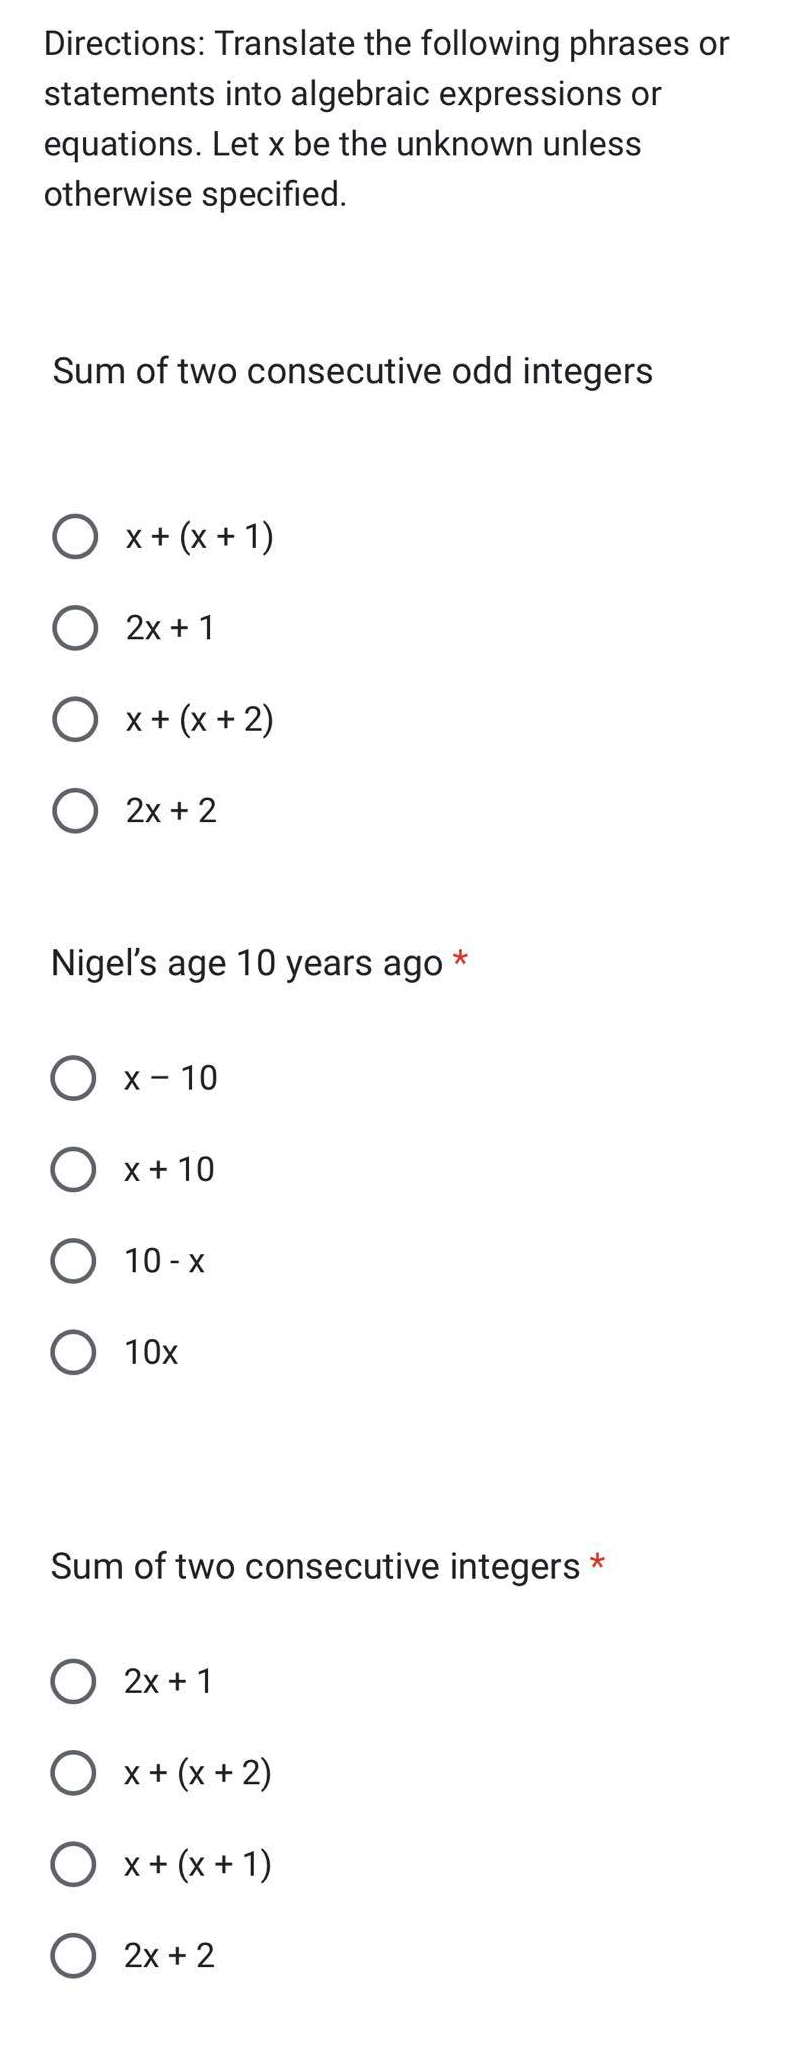 Directions: Translate the following phrases or
statements into algebraic expressions or
equations. Let x be the unknown unless
otherwise specified.
Sum of two consecutive odd integers
O x + (x + 1)
2x + 1
O x + (x + 2)
O 2x + 2
*
Nigel's age 10 years ago
O x-10
O x + 10
O 10-x
O 10x
Sum of two consecutive integers
O 2x + 1
O x + (x + 2)
O x + (x + 1)
O 2x + 2
*